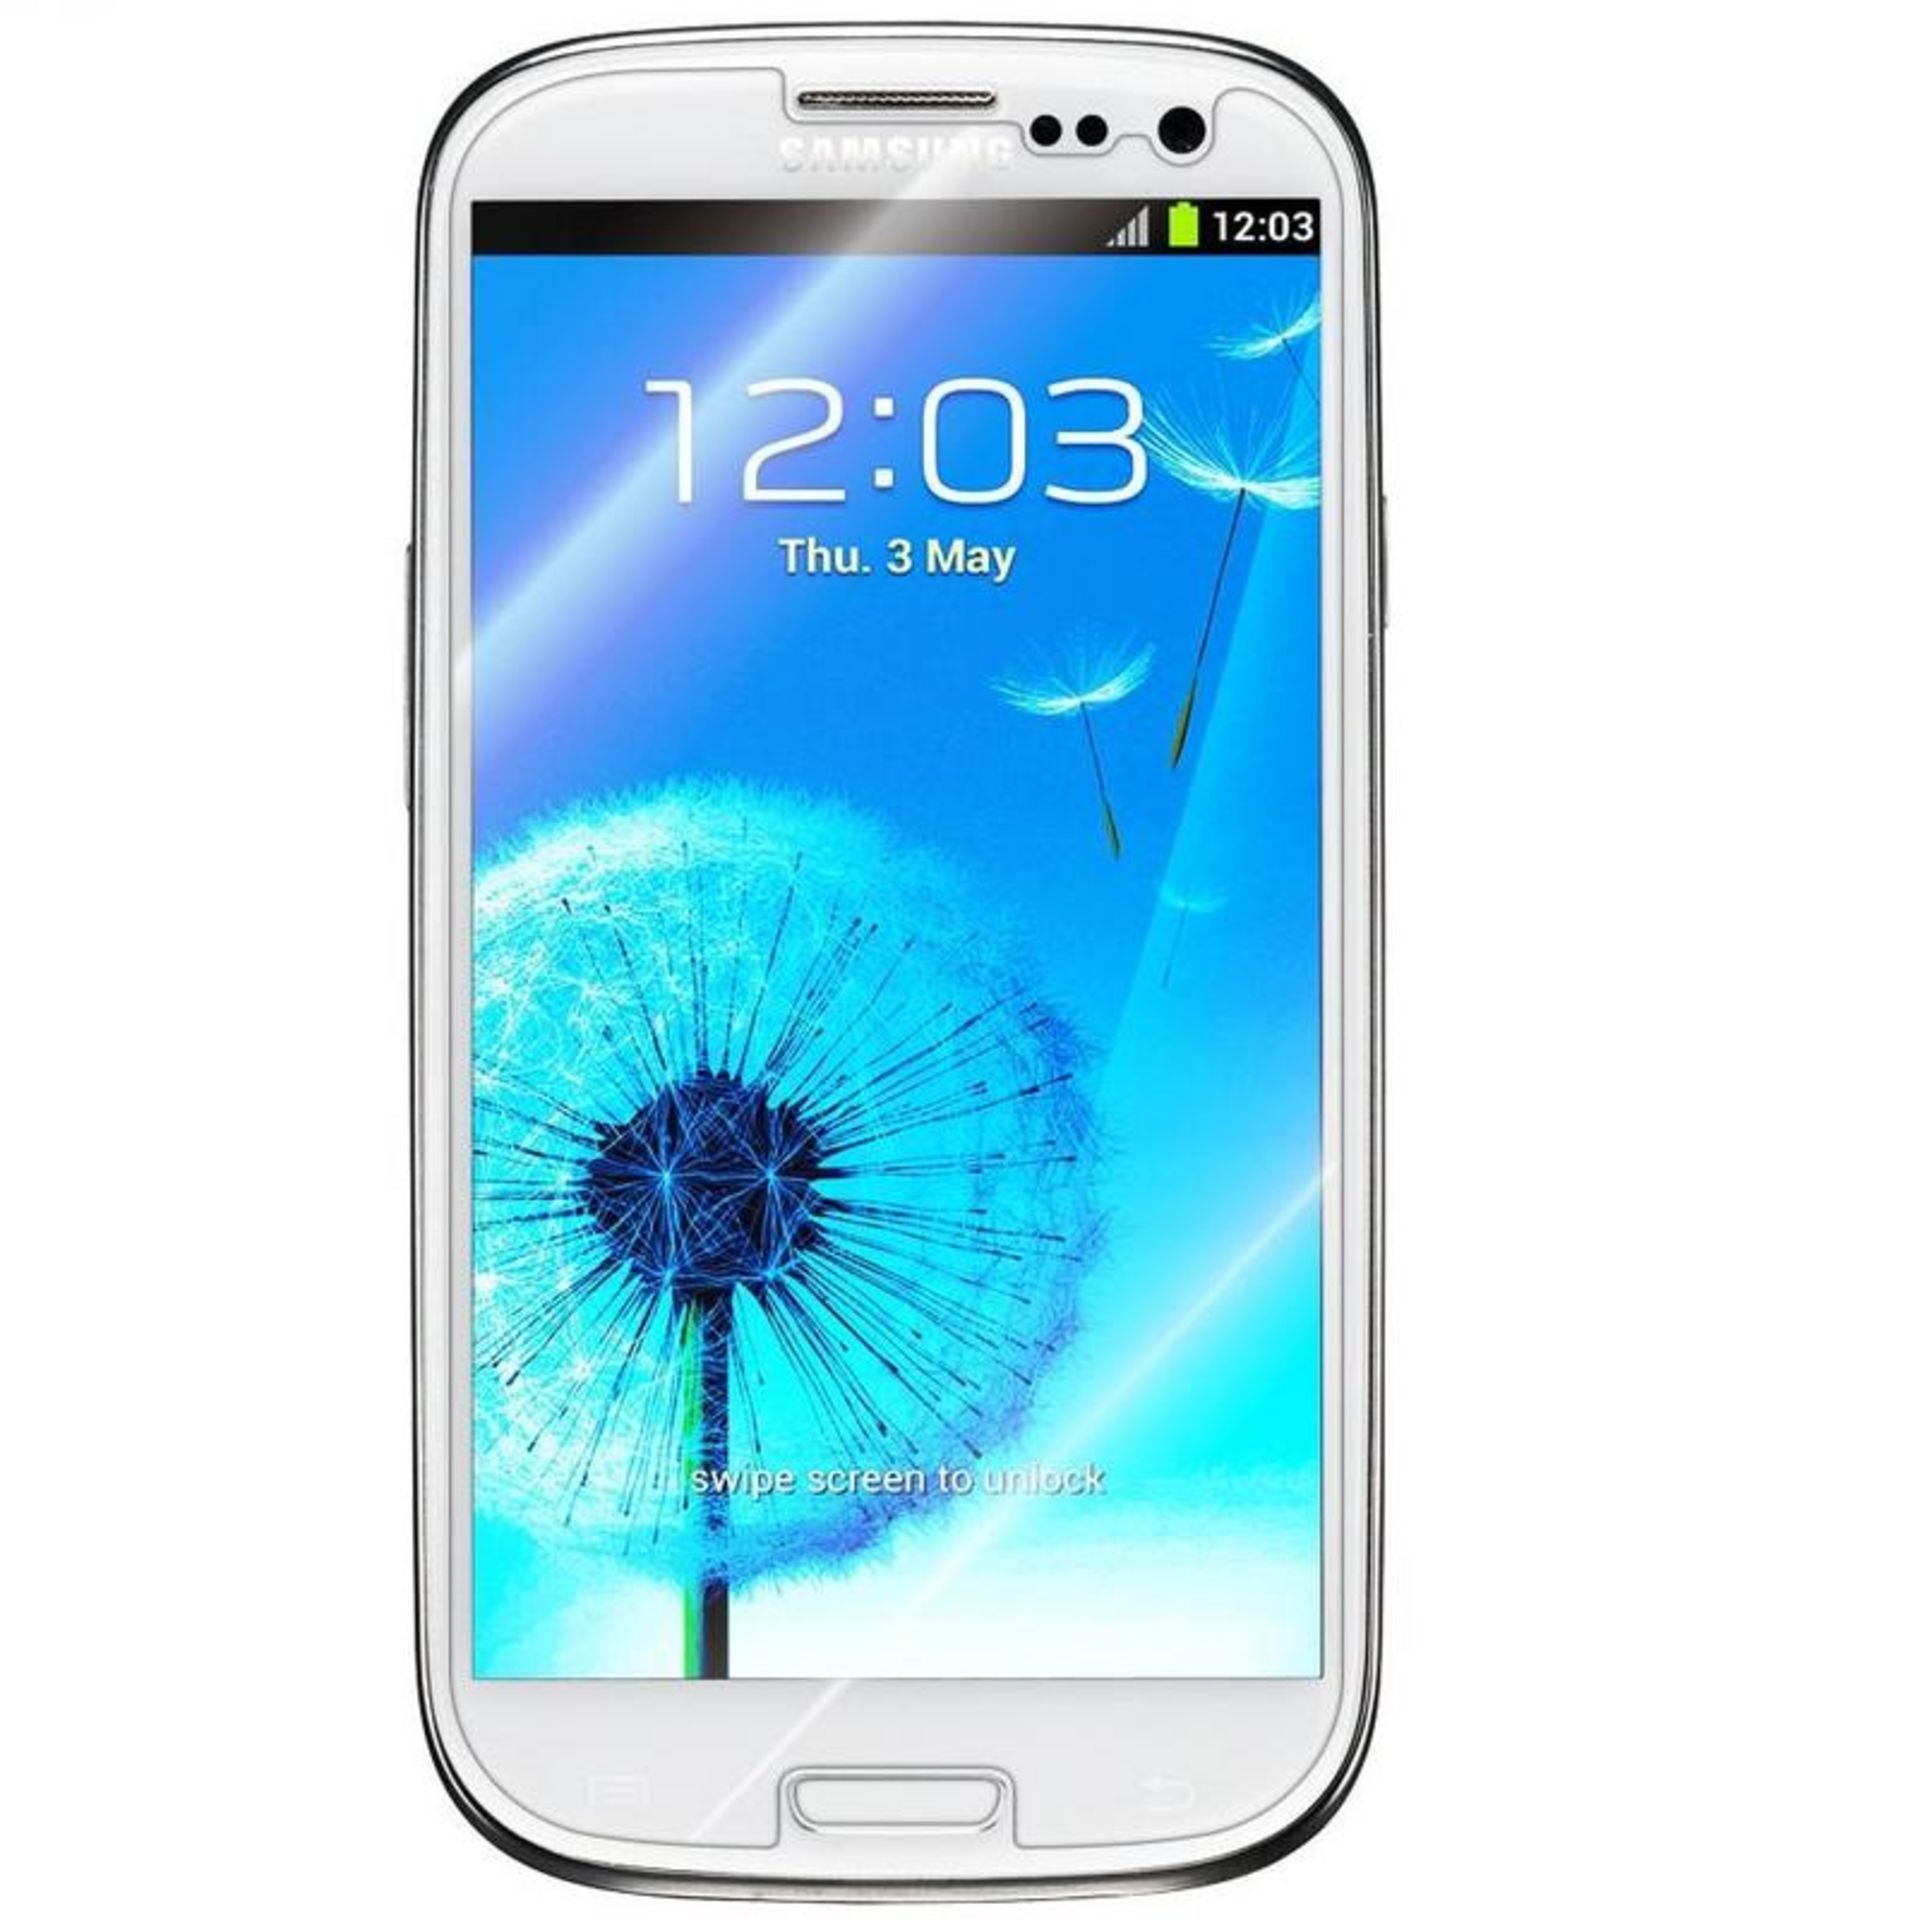 Grade A Samsung S3(i9300) Colours May Vary Item available approx 15 working days after sale